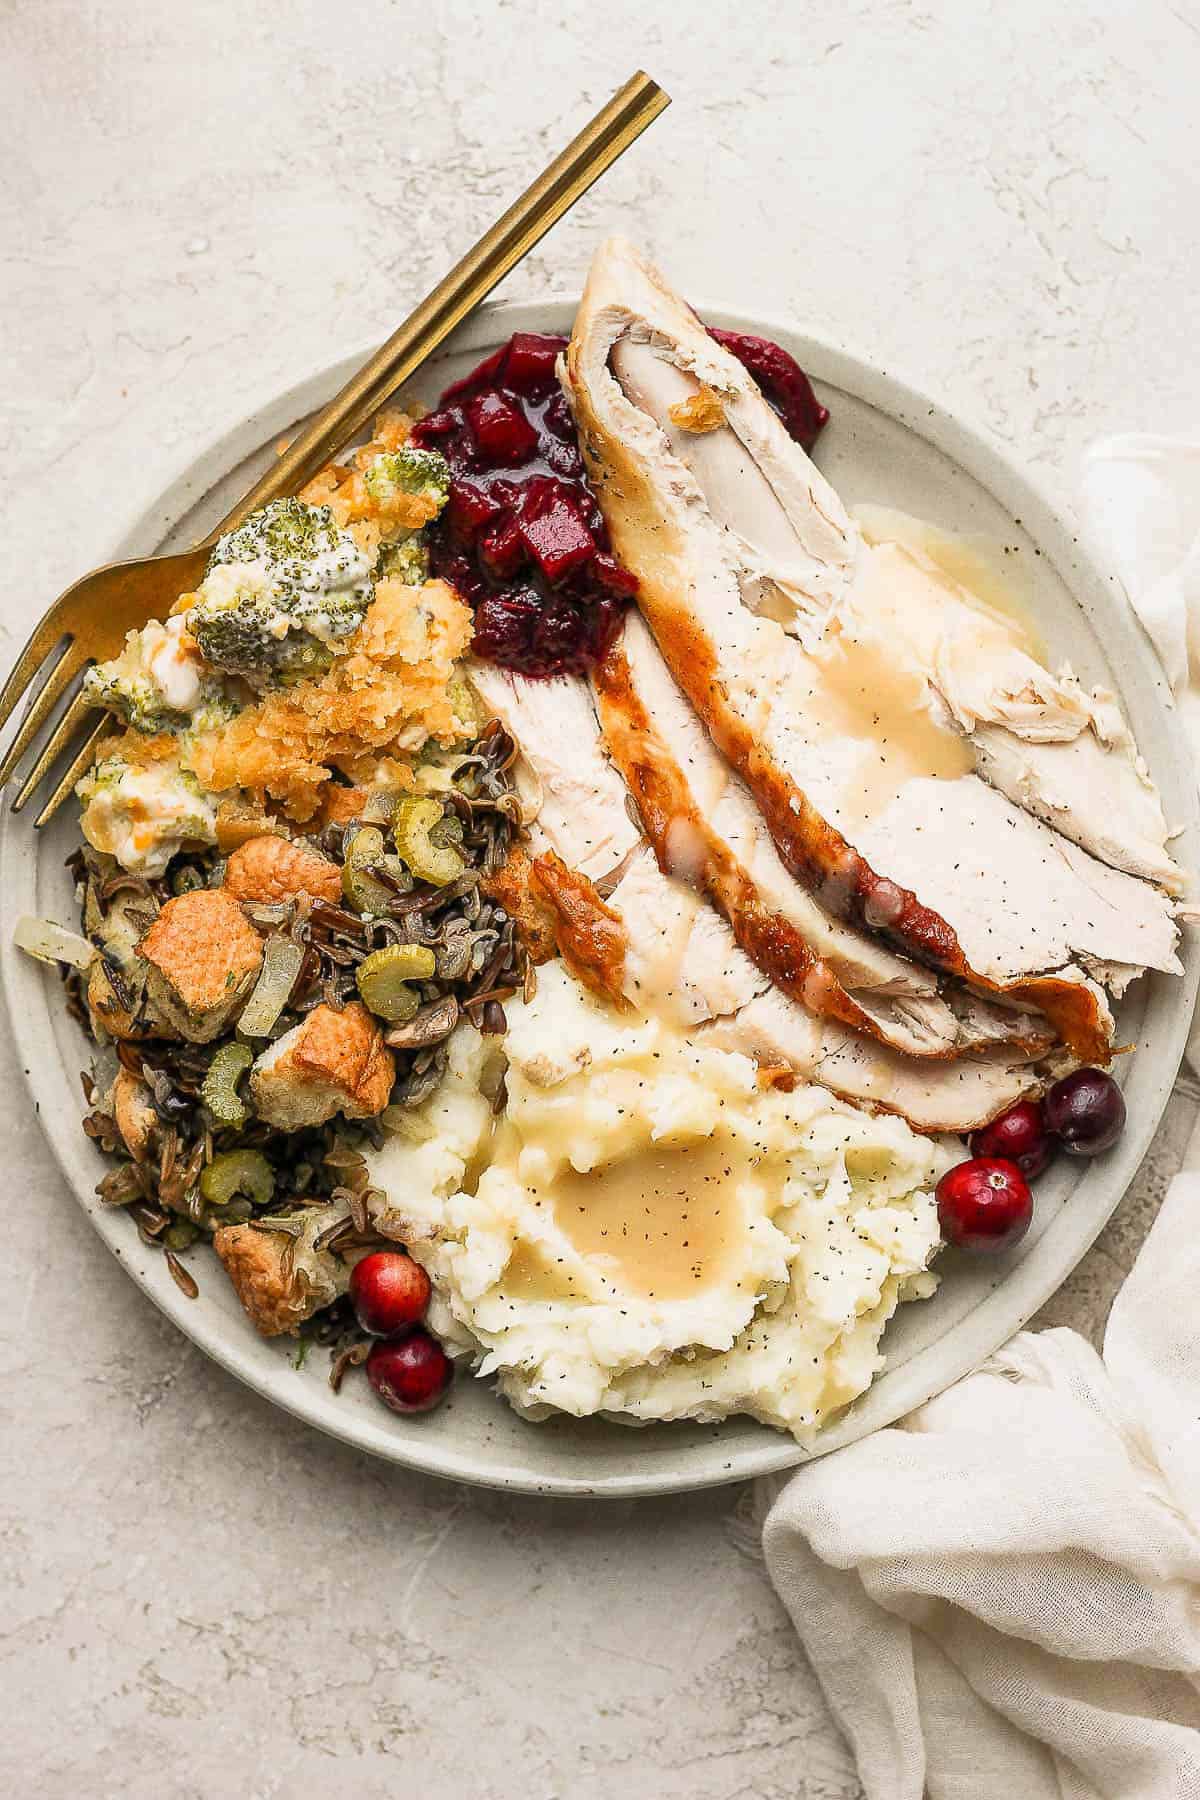 Turkey slices on a plate with stuffing, broccoli casserole, and cranberry sauce.